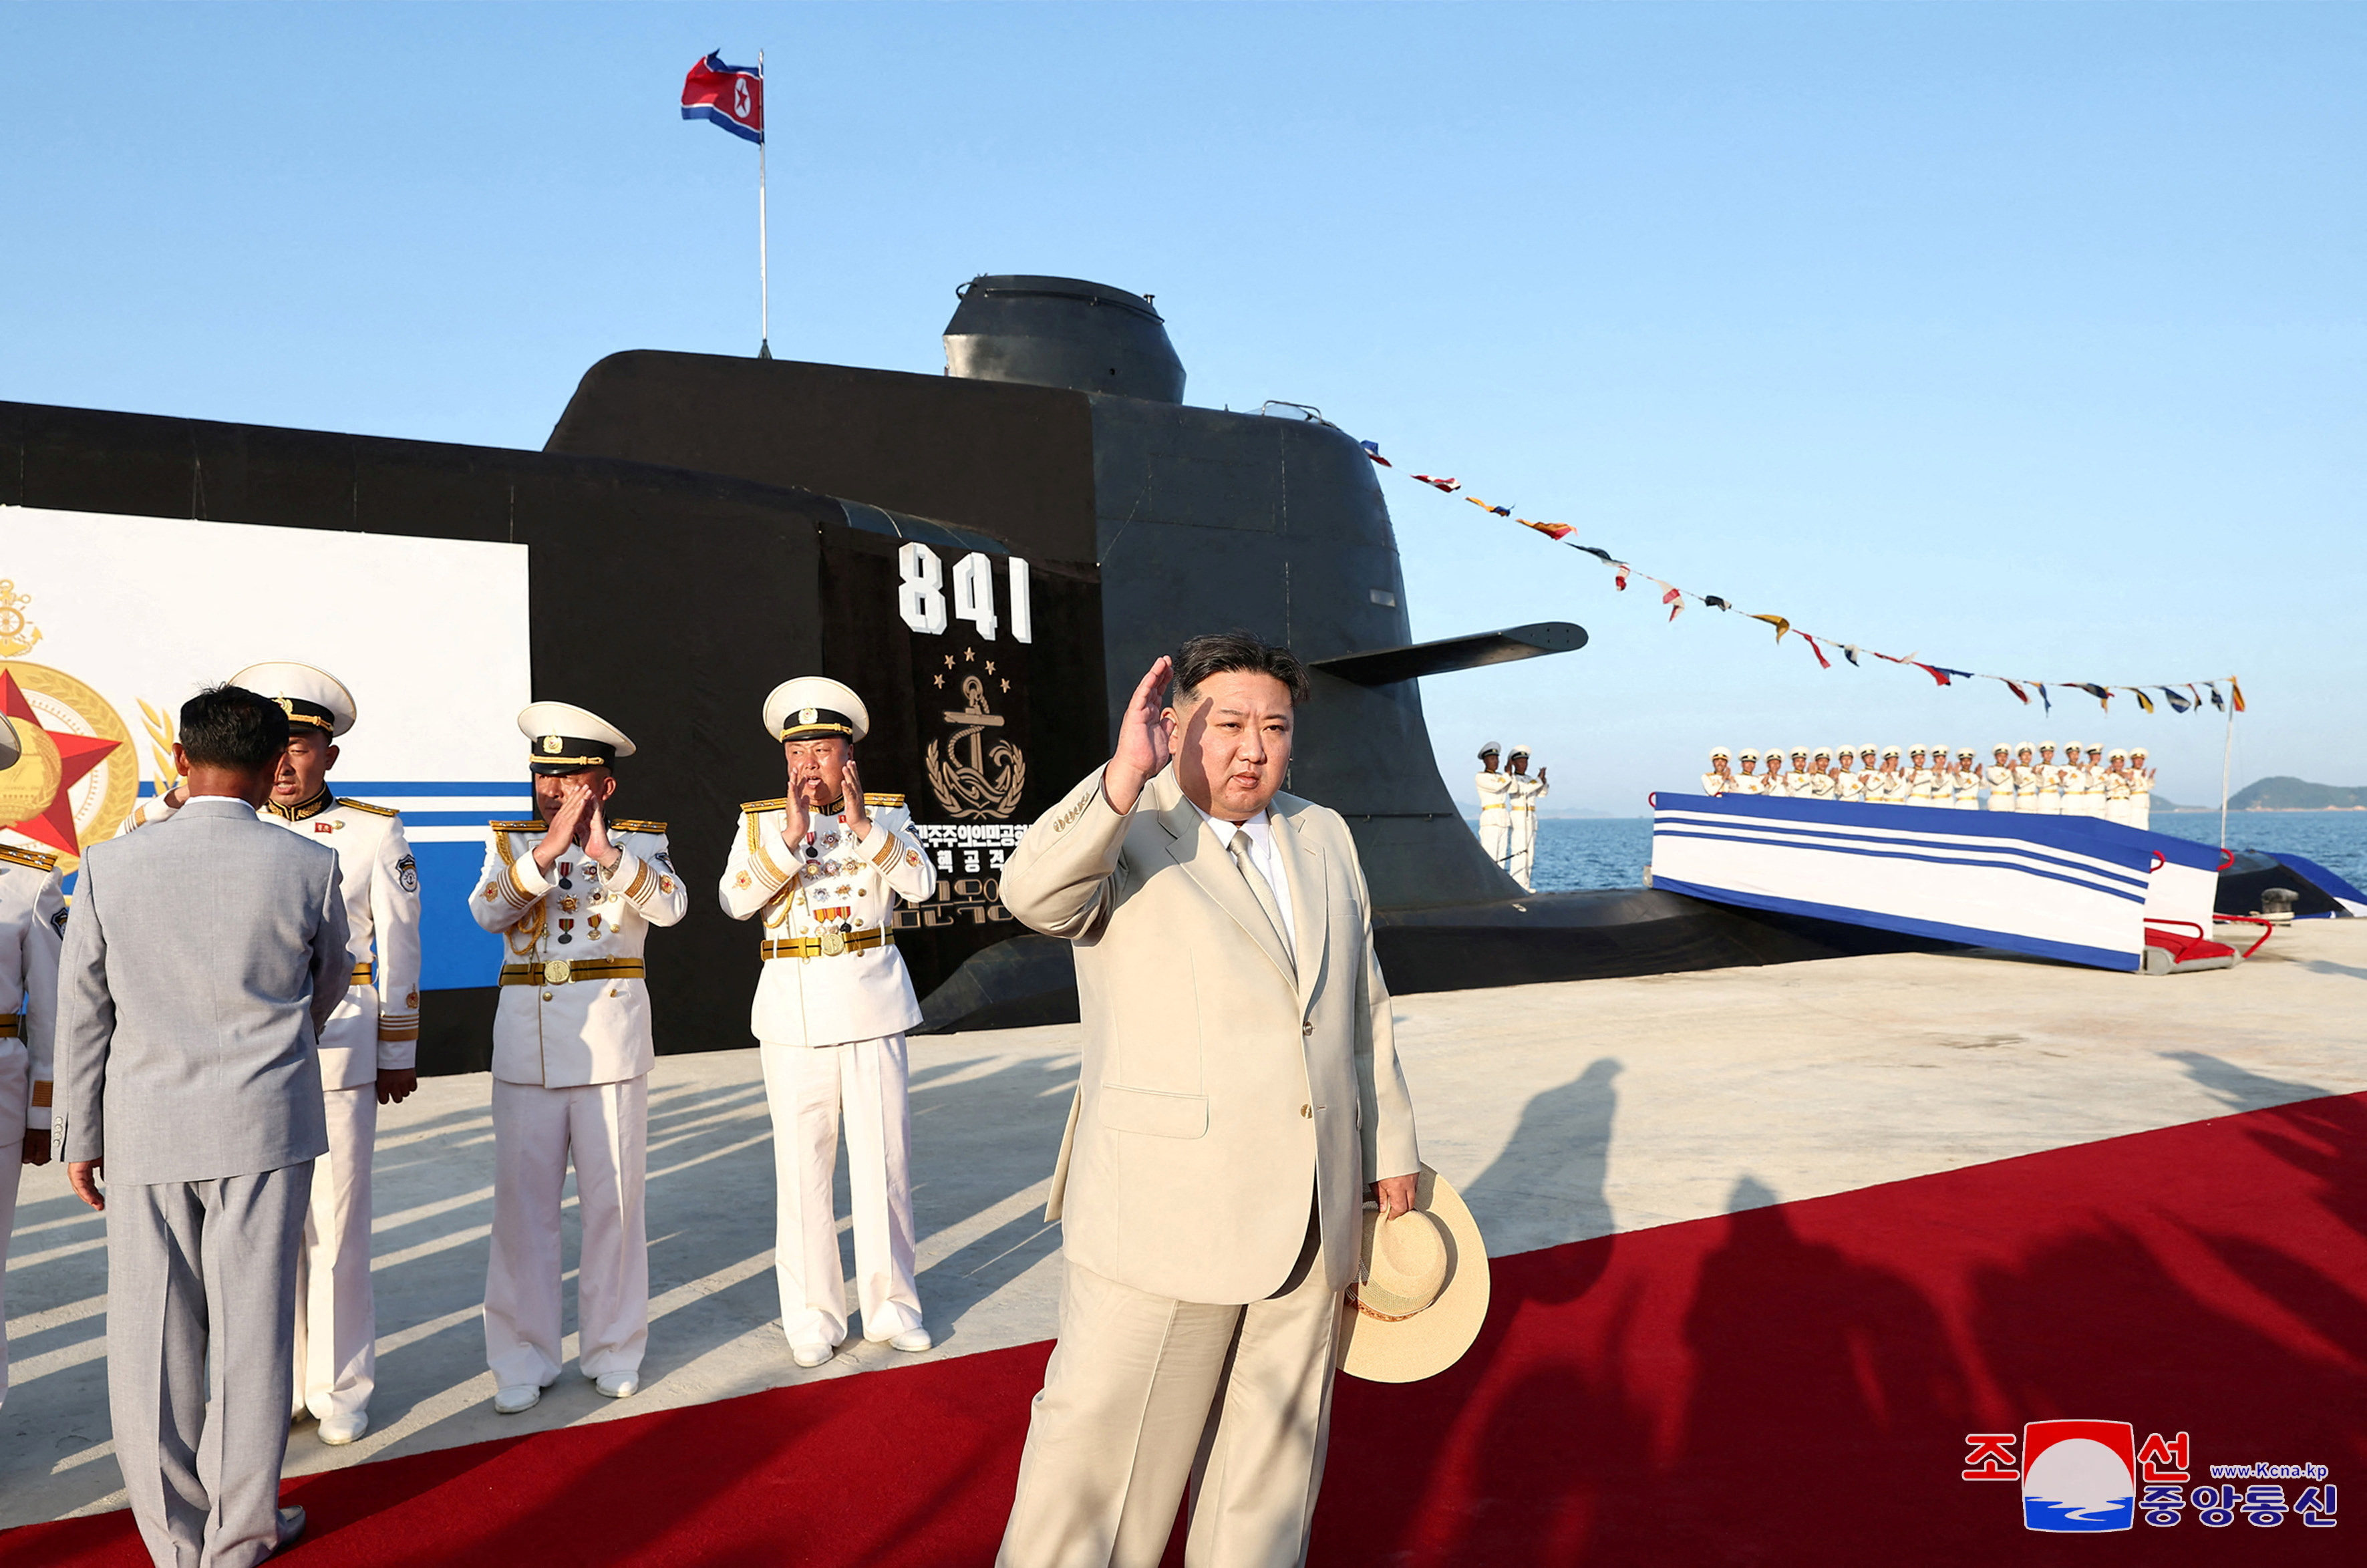 North Korean leader Kim Jong-un attends the launching ceremony for what state media reported was a new tactical nuclear attack submarine. Photo: KCNA via Reuters
